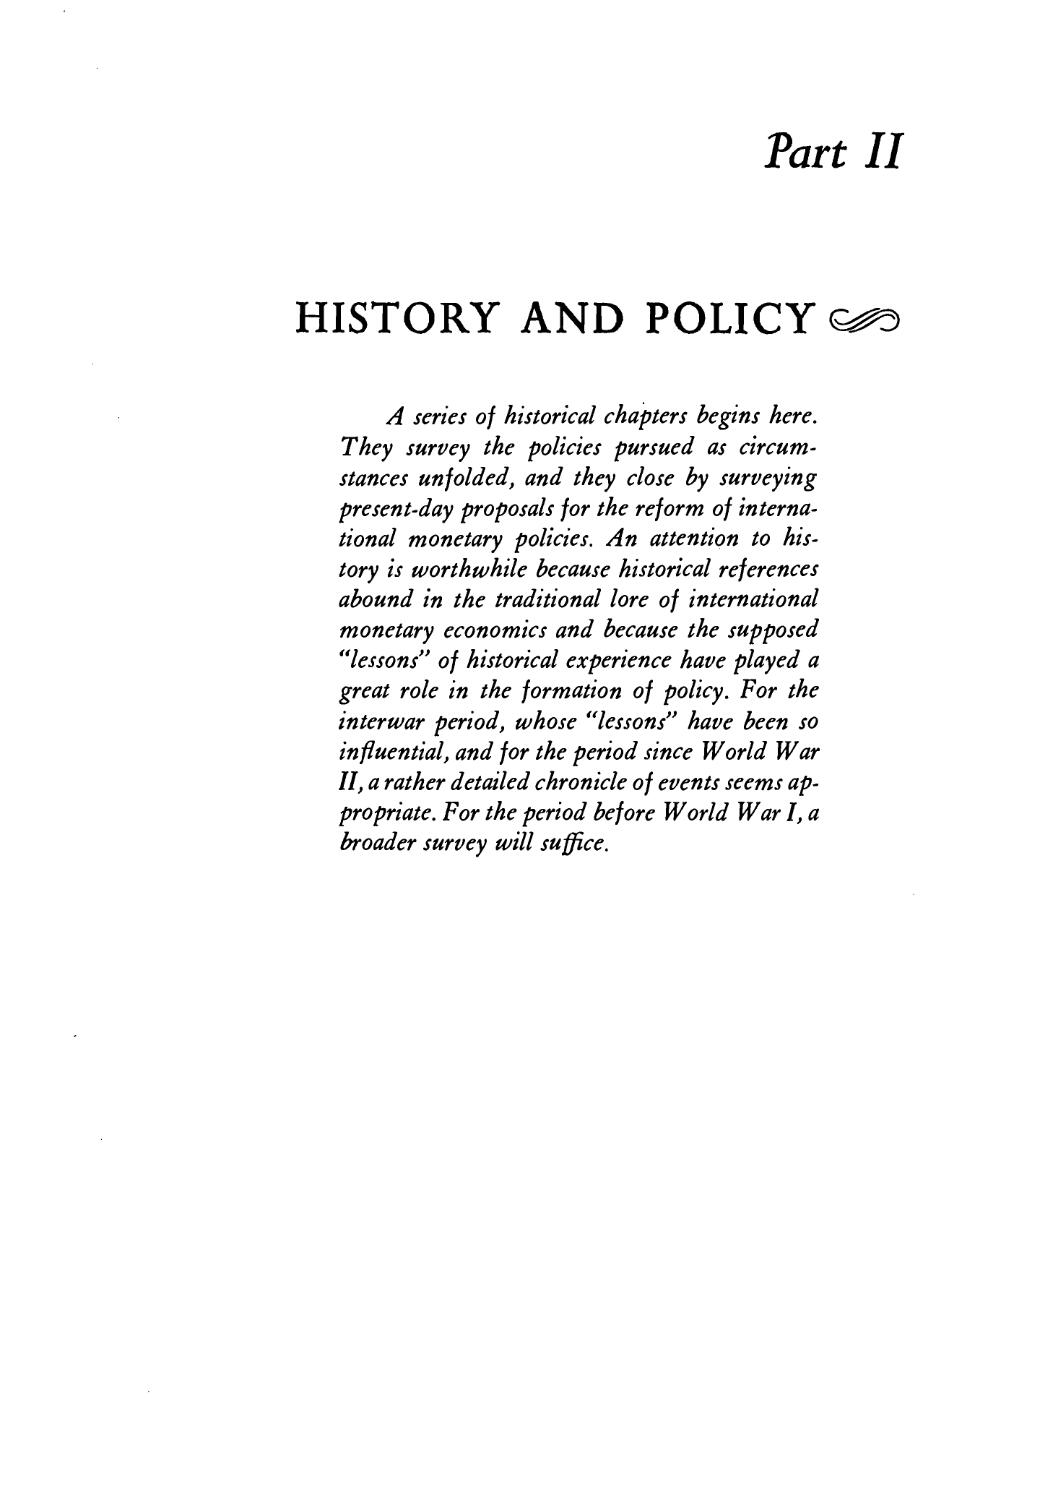 Part II. History and Policy